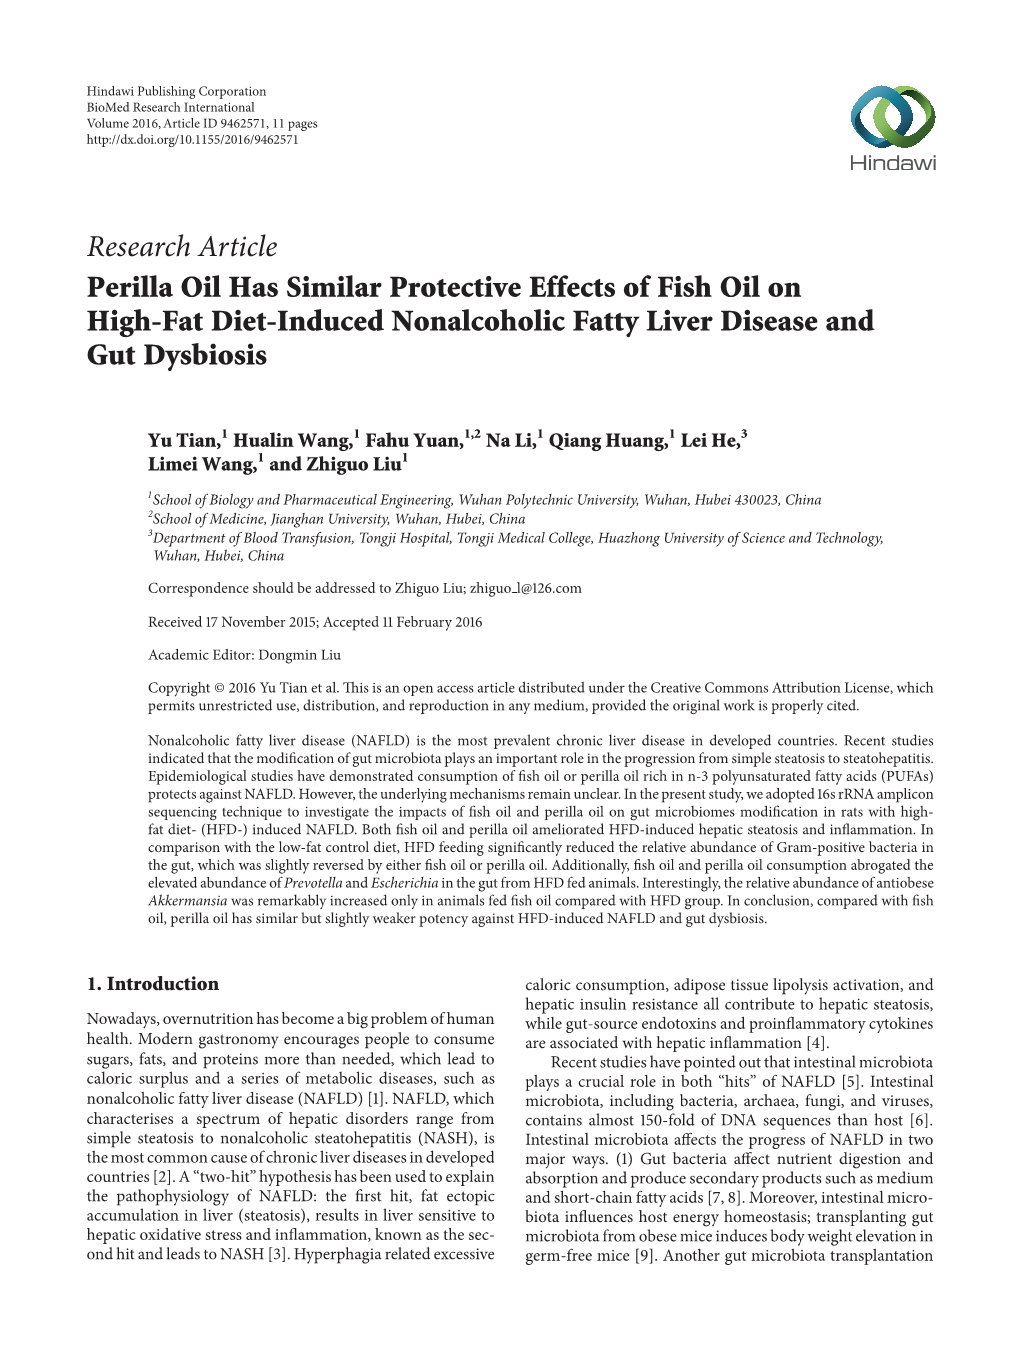 Research Article Perilla Oil Has Similar Protective Effects of Fish Oil on High-Fat Diet-Induced Nonalcoholic Fatty Liver Disease and Gut Dysbiosis